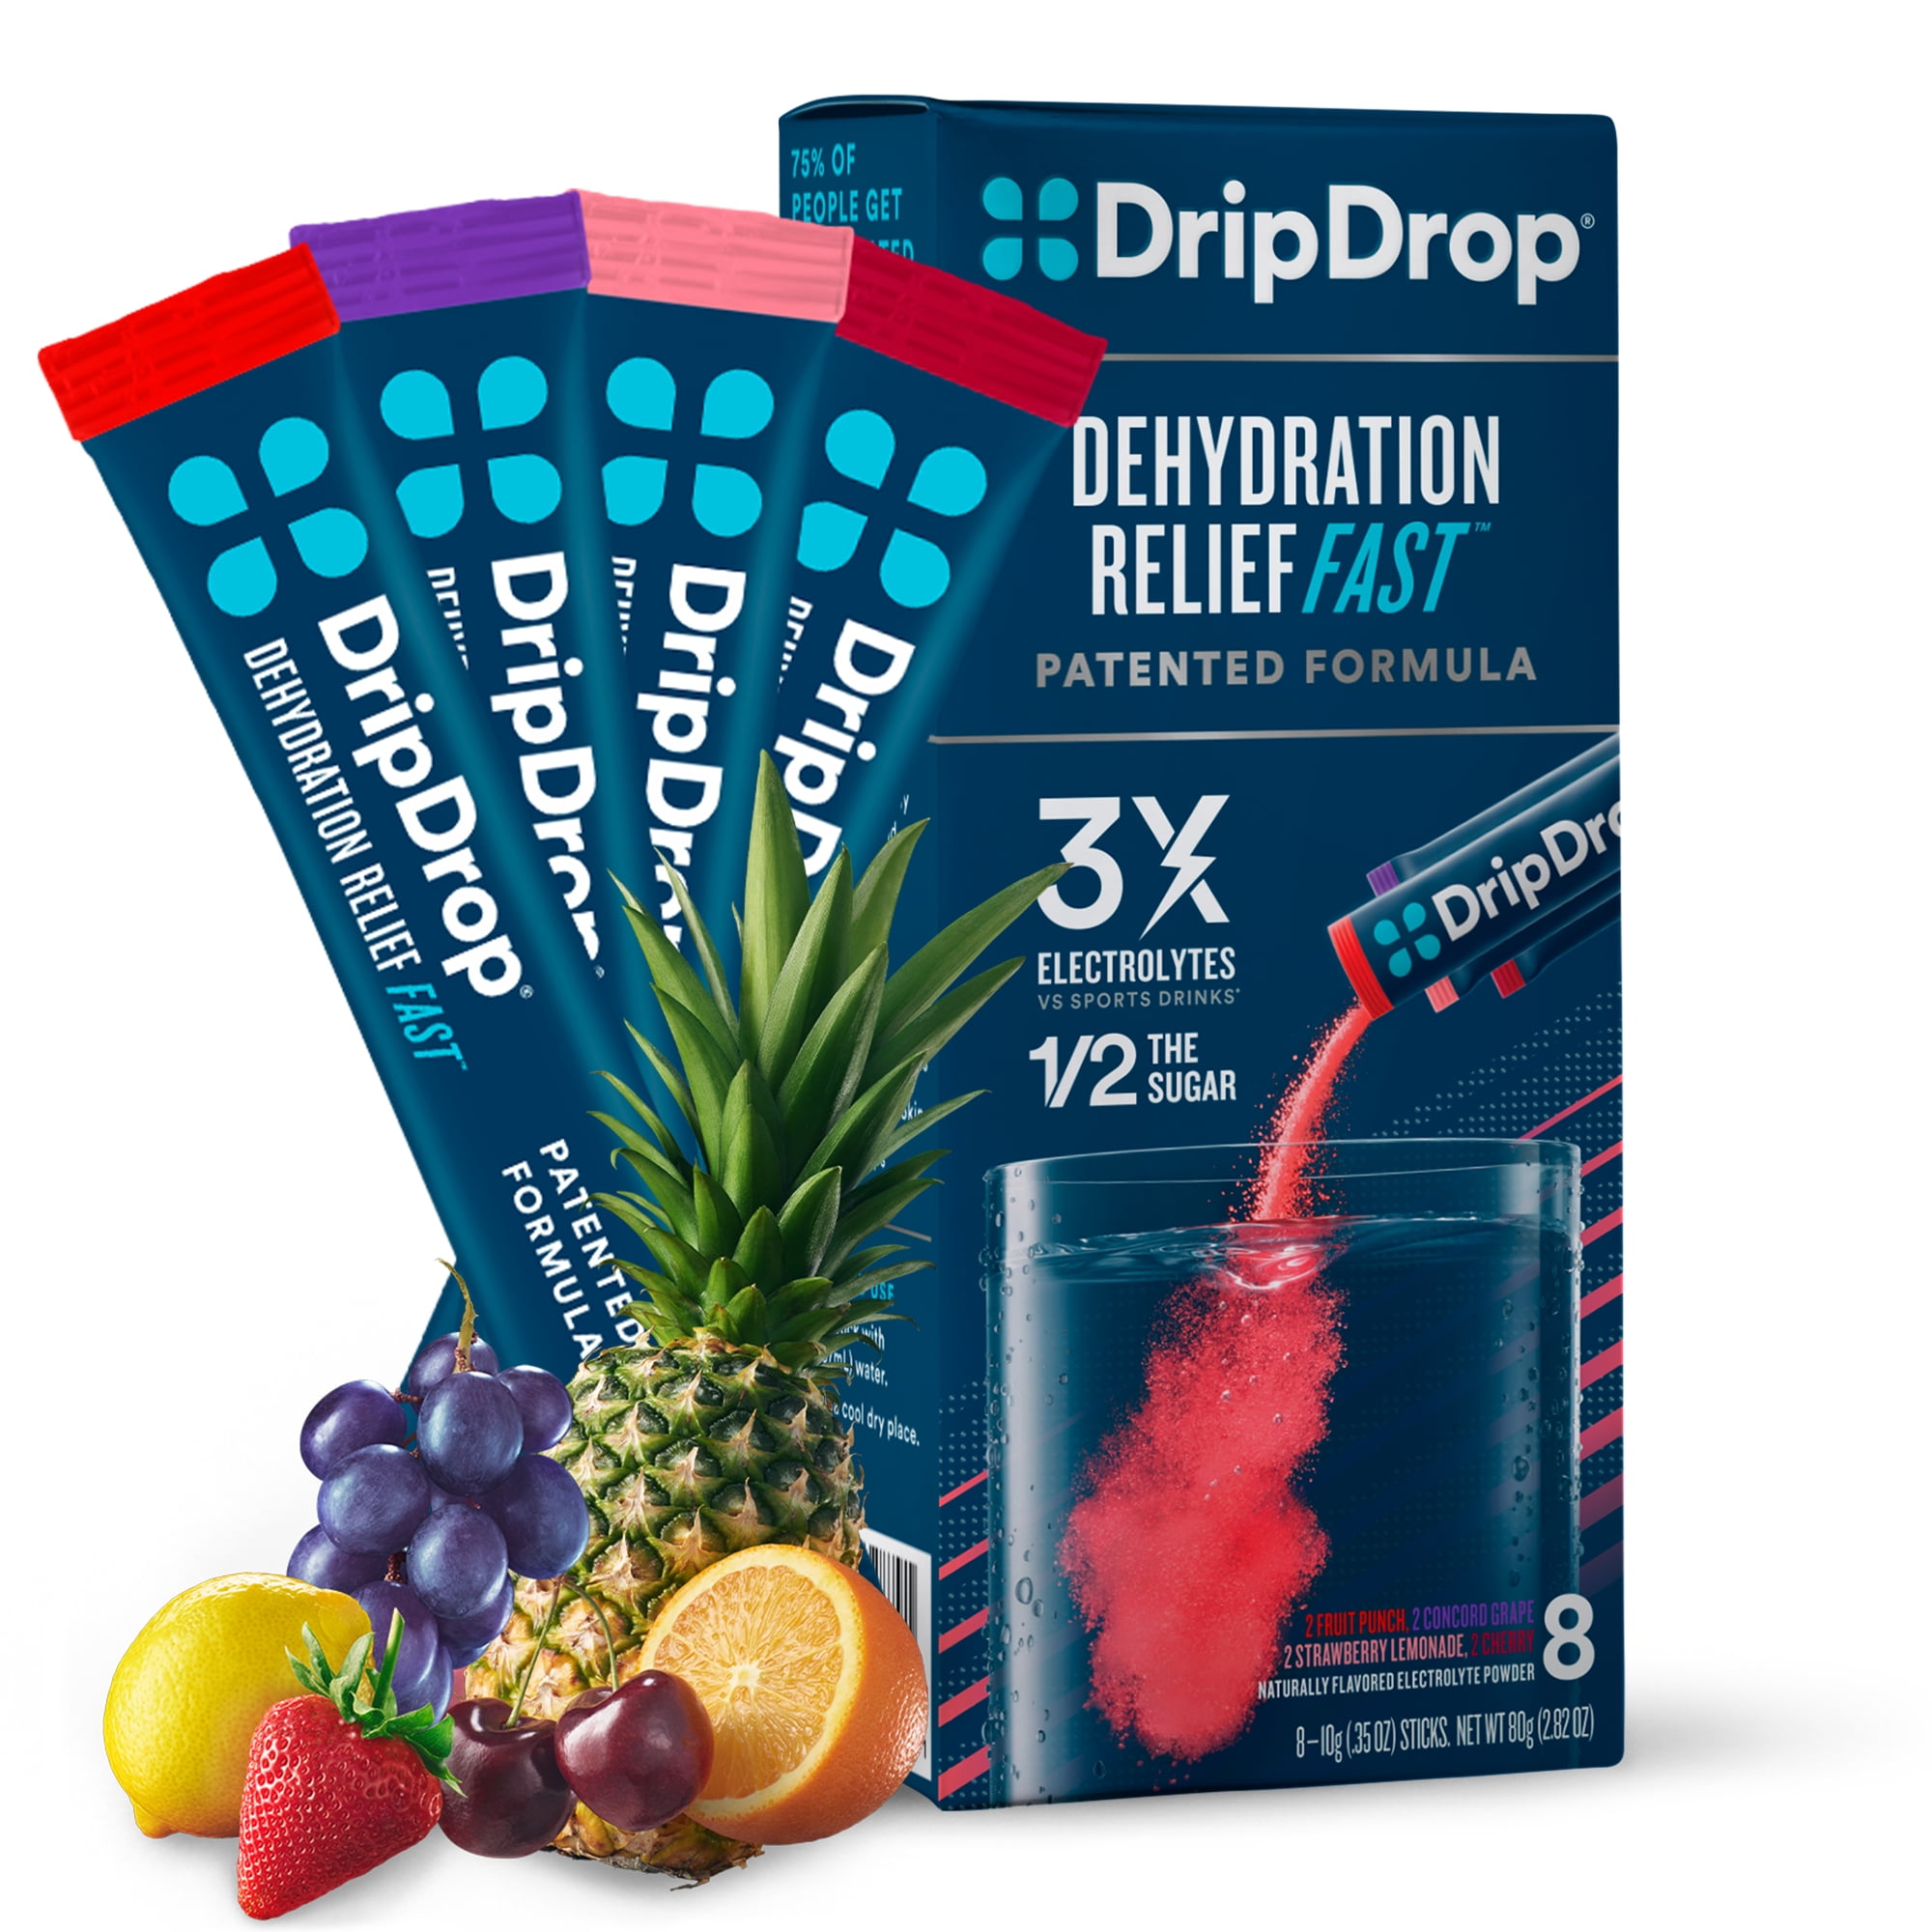 DripDrop Electrolyte Powder Drink Mix for Dehydration Relief Fast, Juicy  Variety, 8 Pk